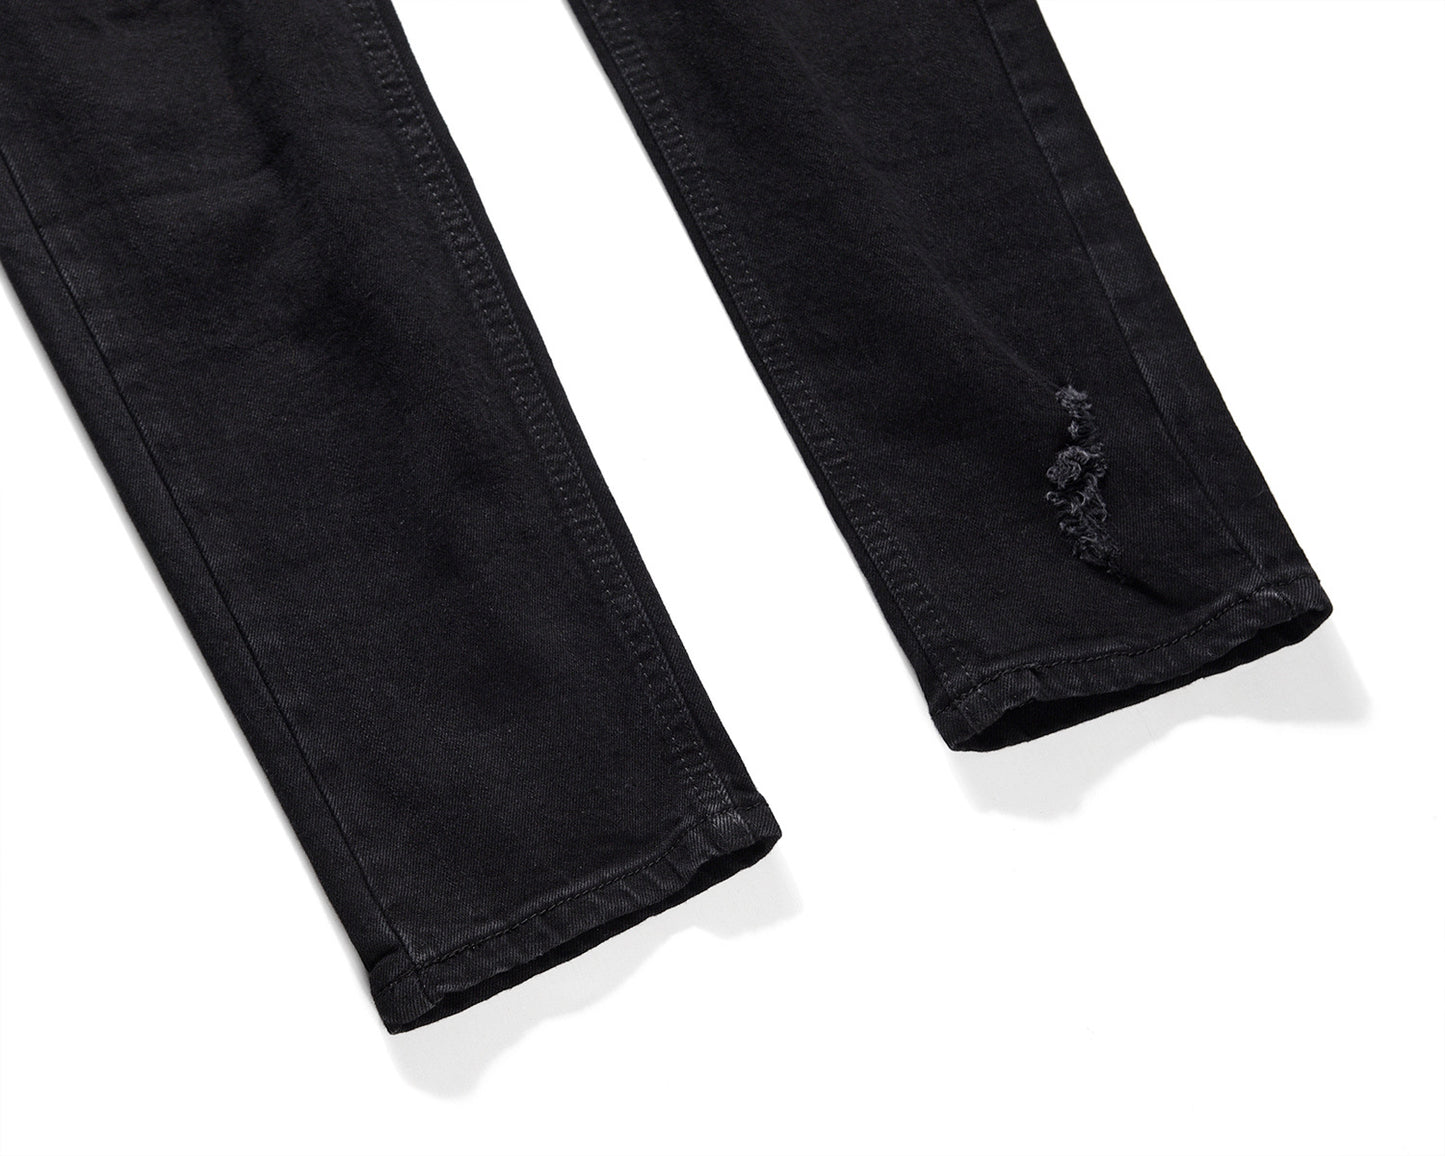 Black Ripped Stretch Jeans Slim Fit Casual Trousers